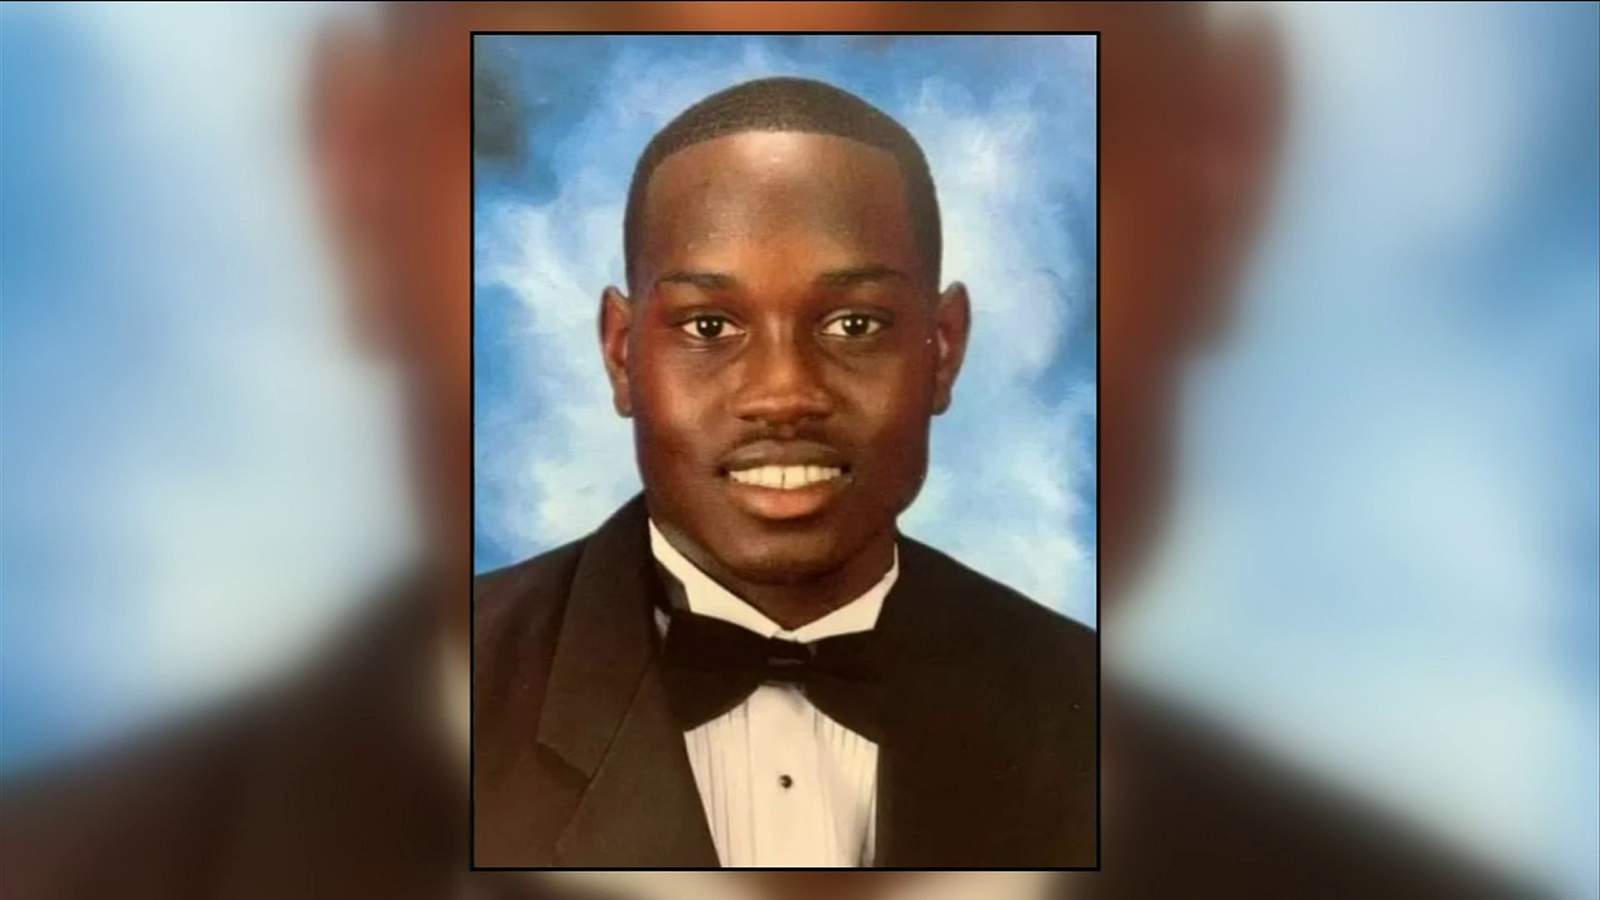 1 year since deadly shooting, vigils planned in Georgia for Ahmaud Arbery